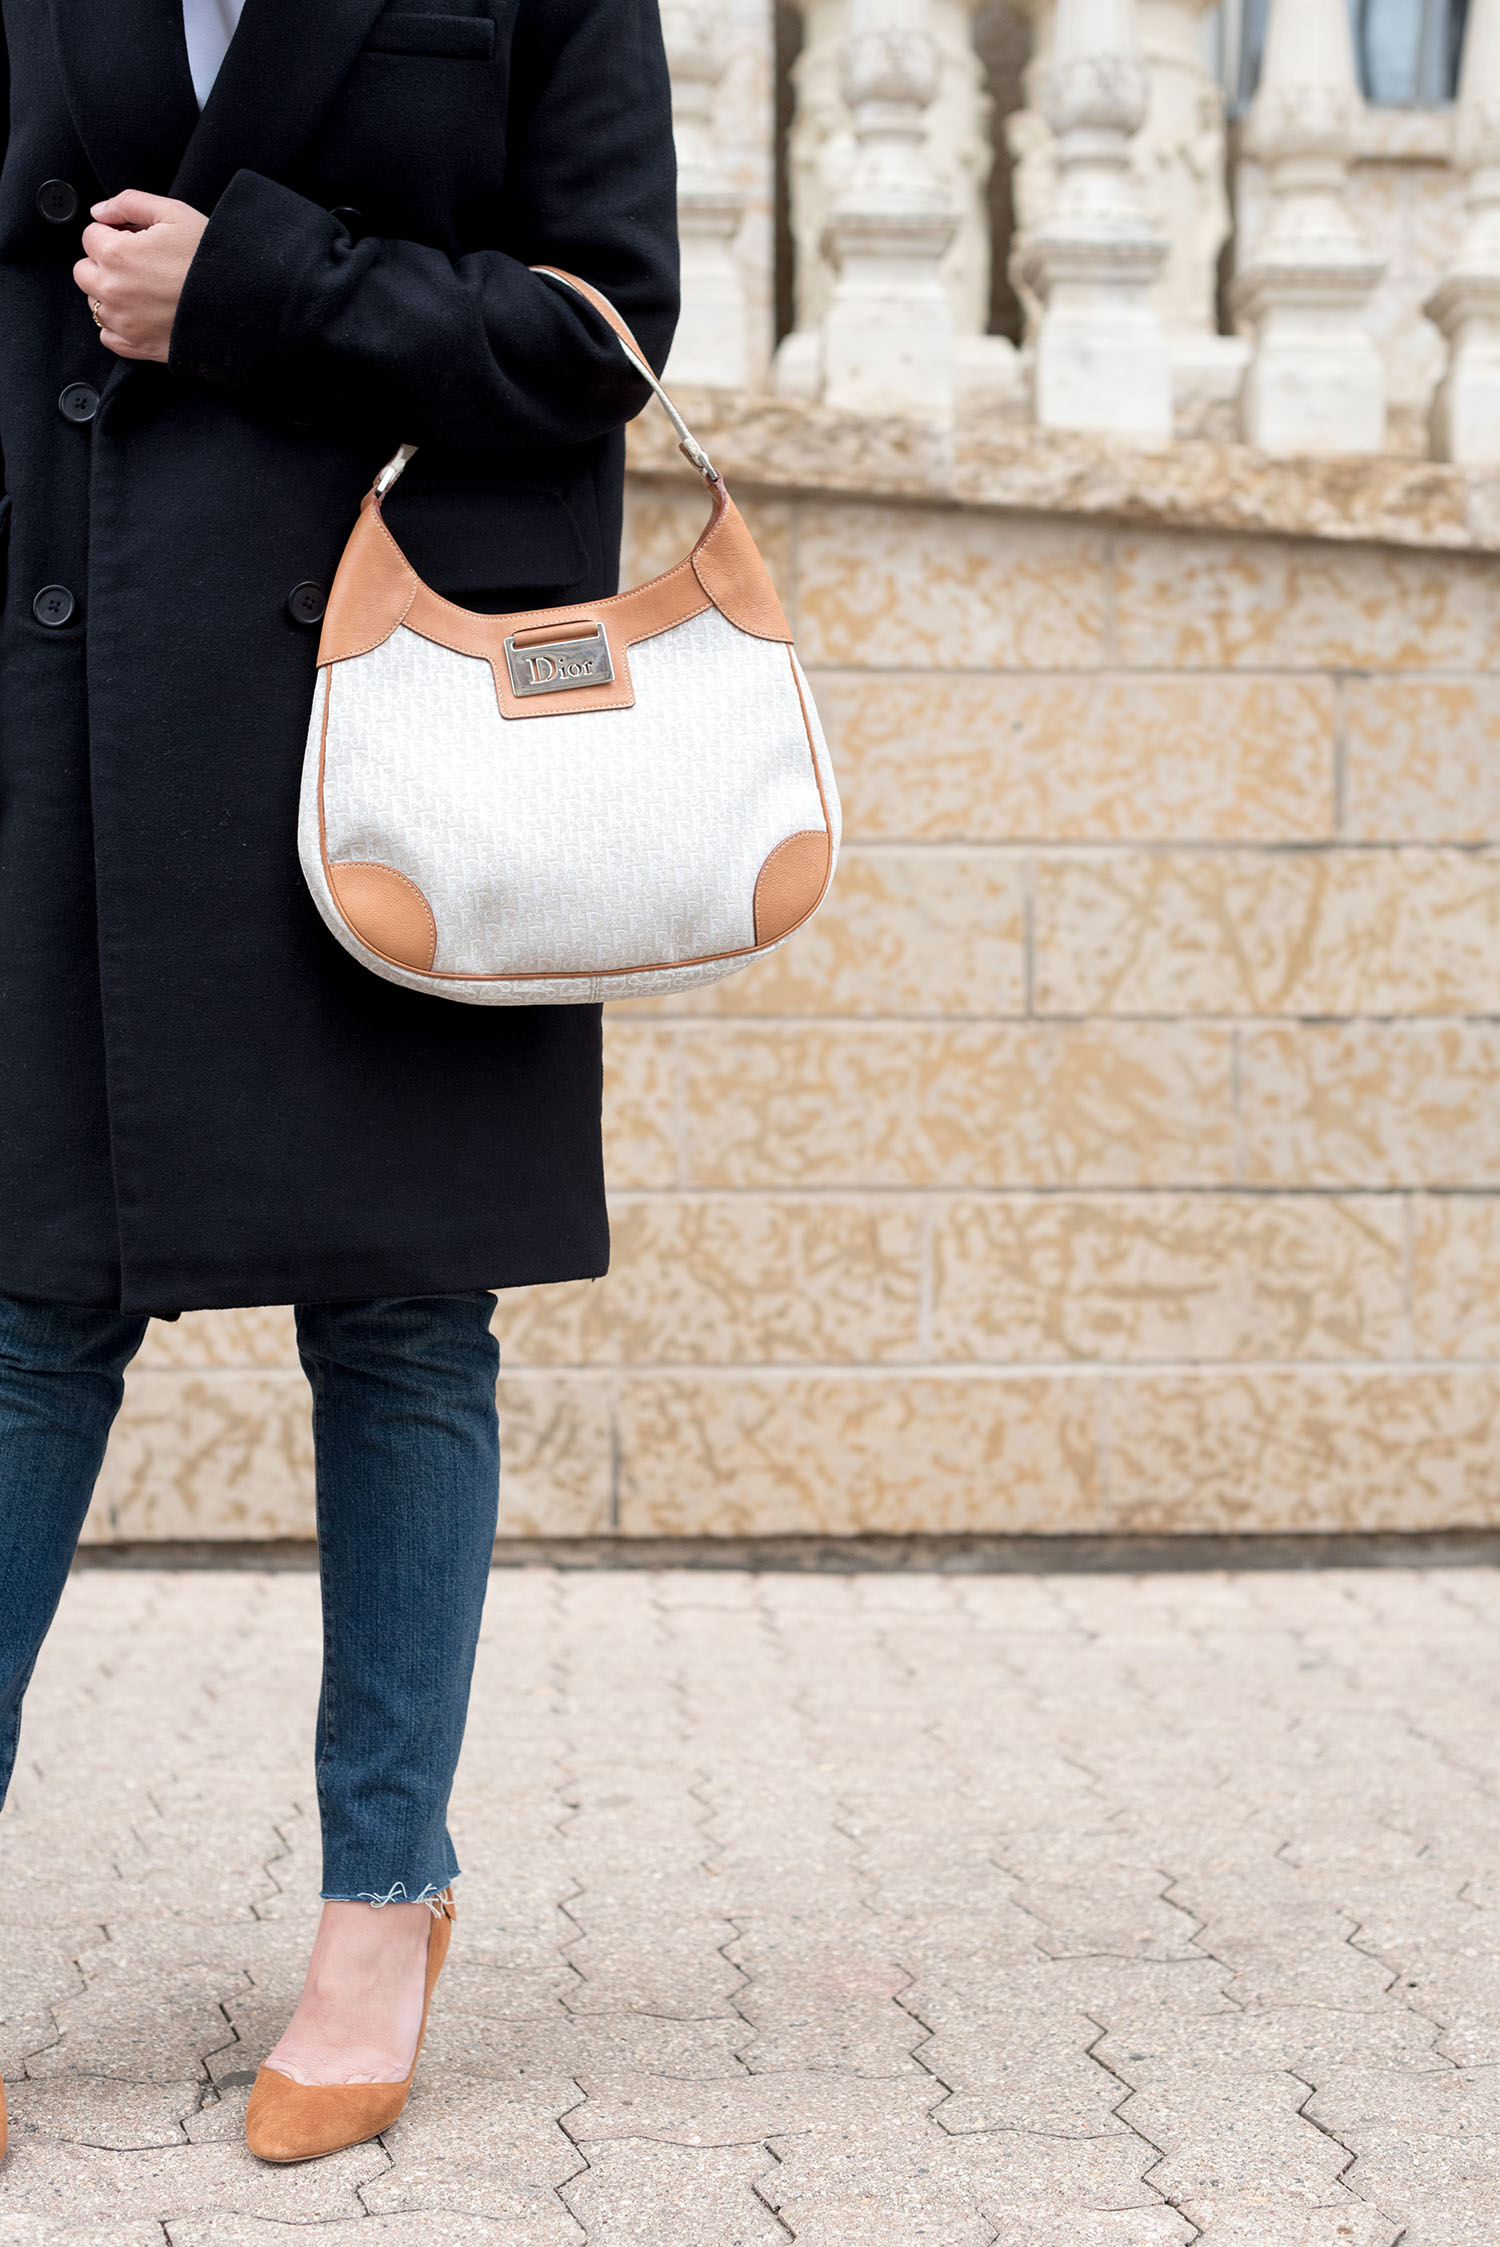 Outfit details on top Canadian fashion blogger Cee Fardoe of Coco & Vera, including a Dior handbag and Sezane pumps